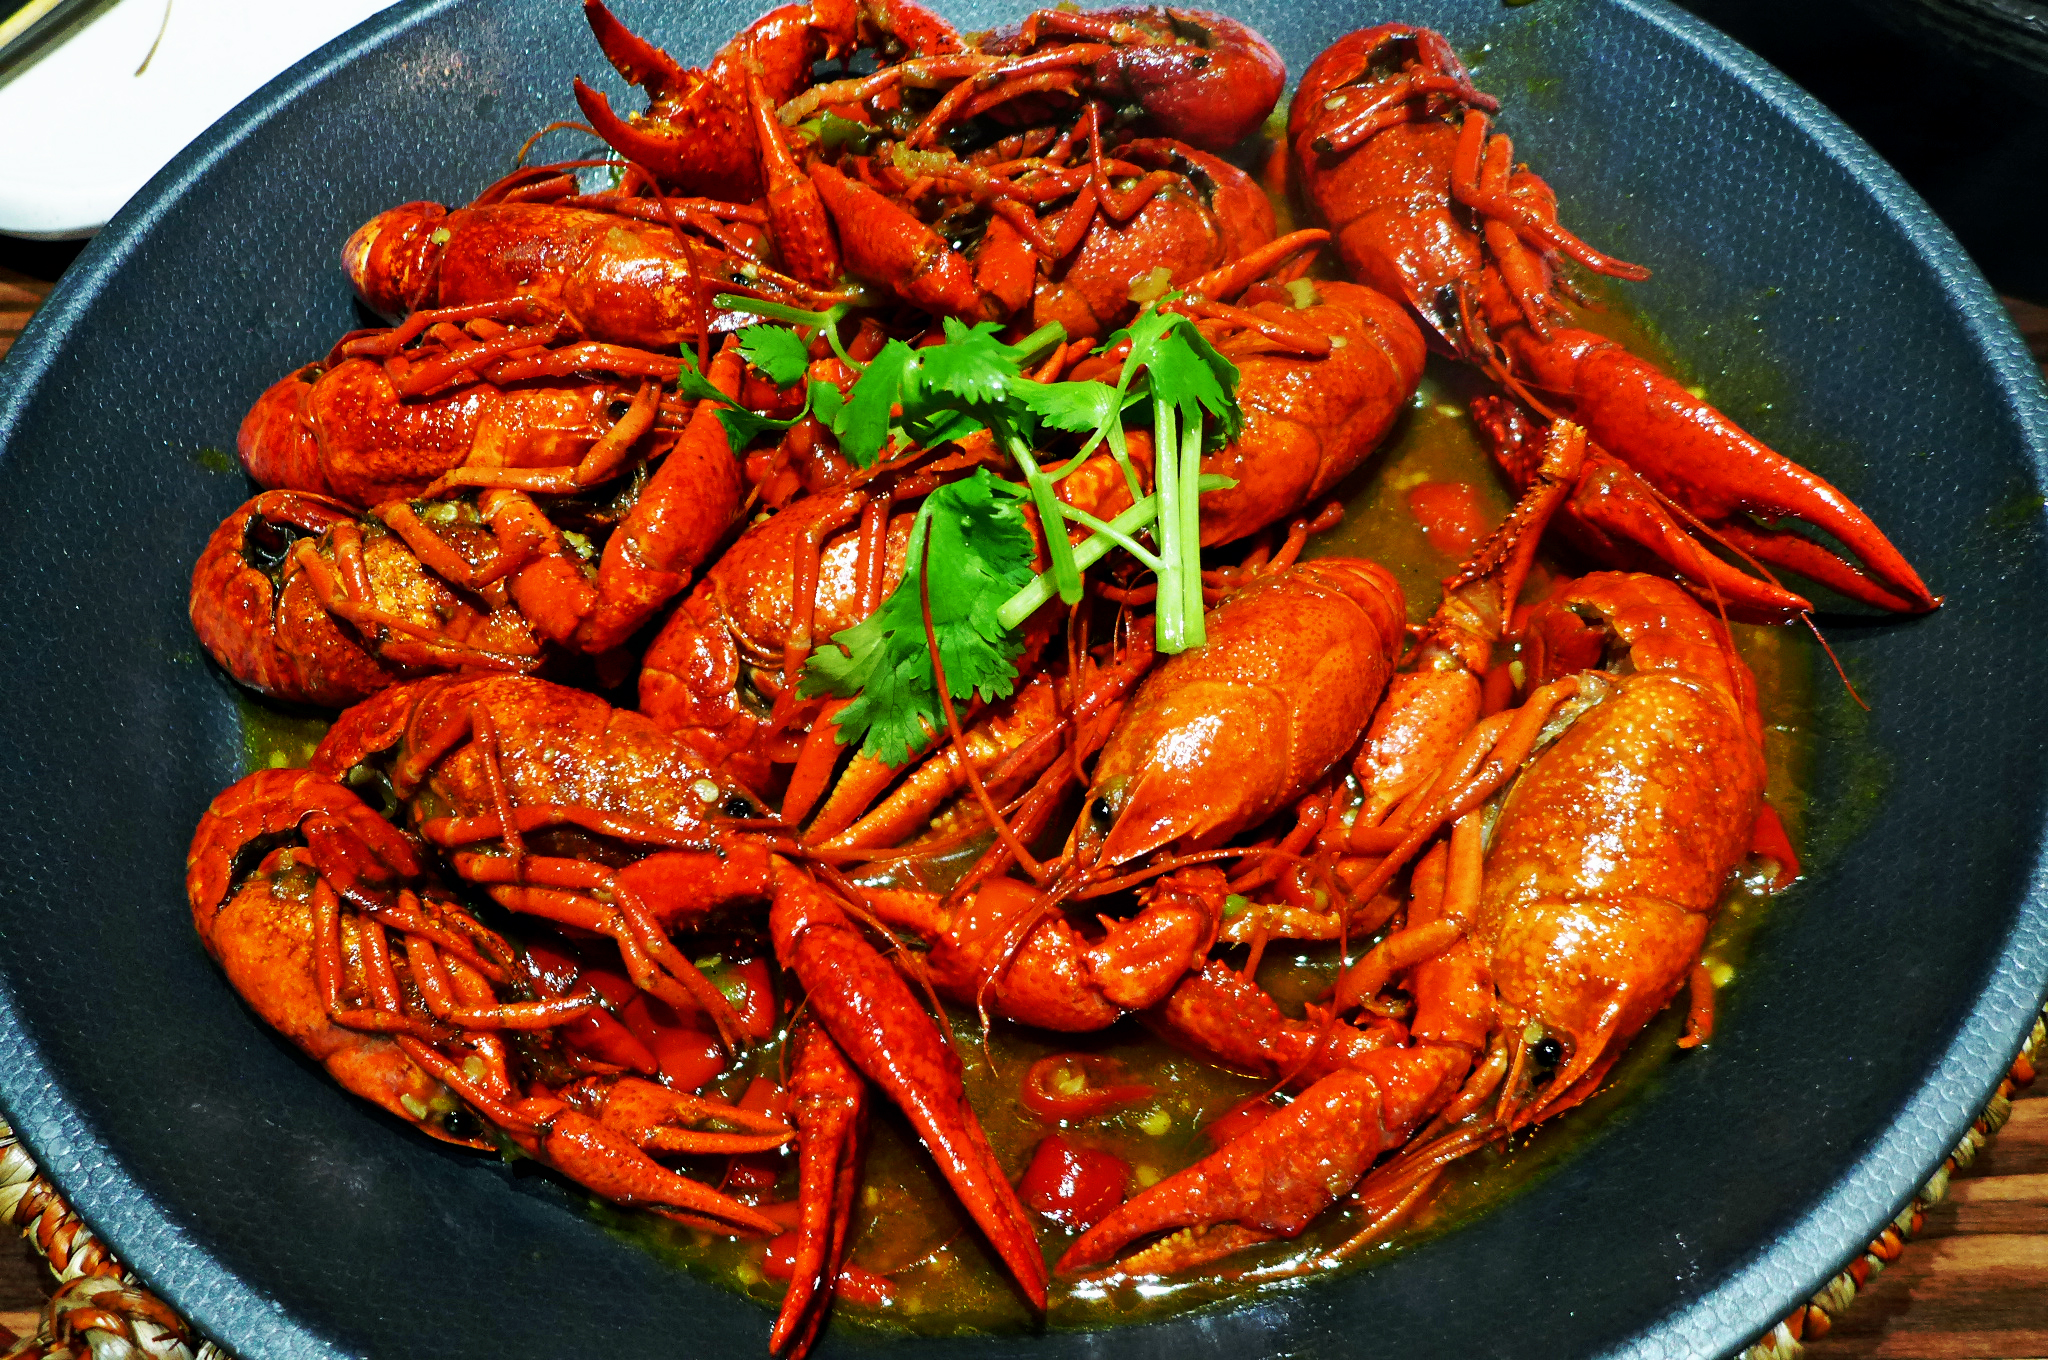 A pound of crawfish easily feeds two or three.